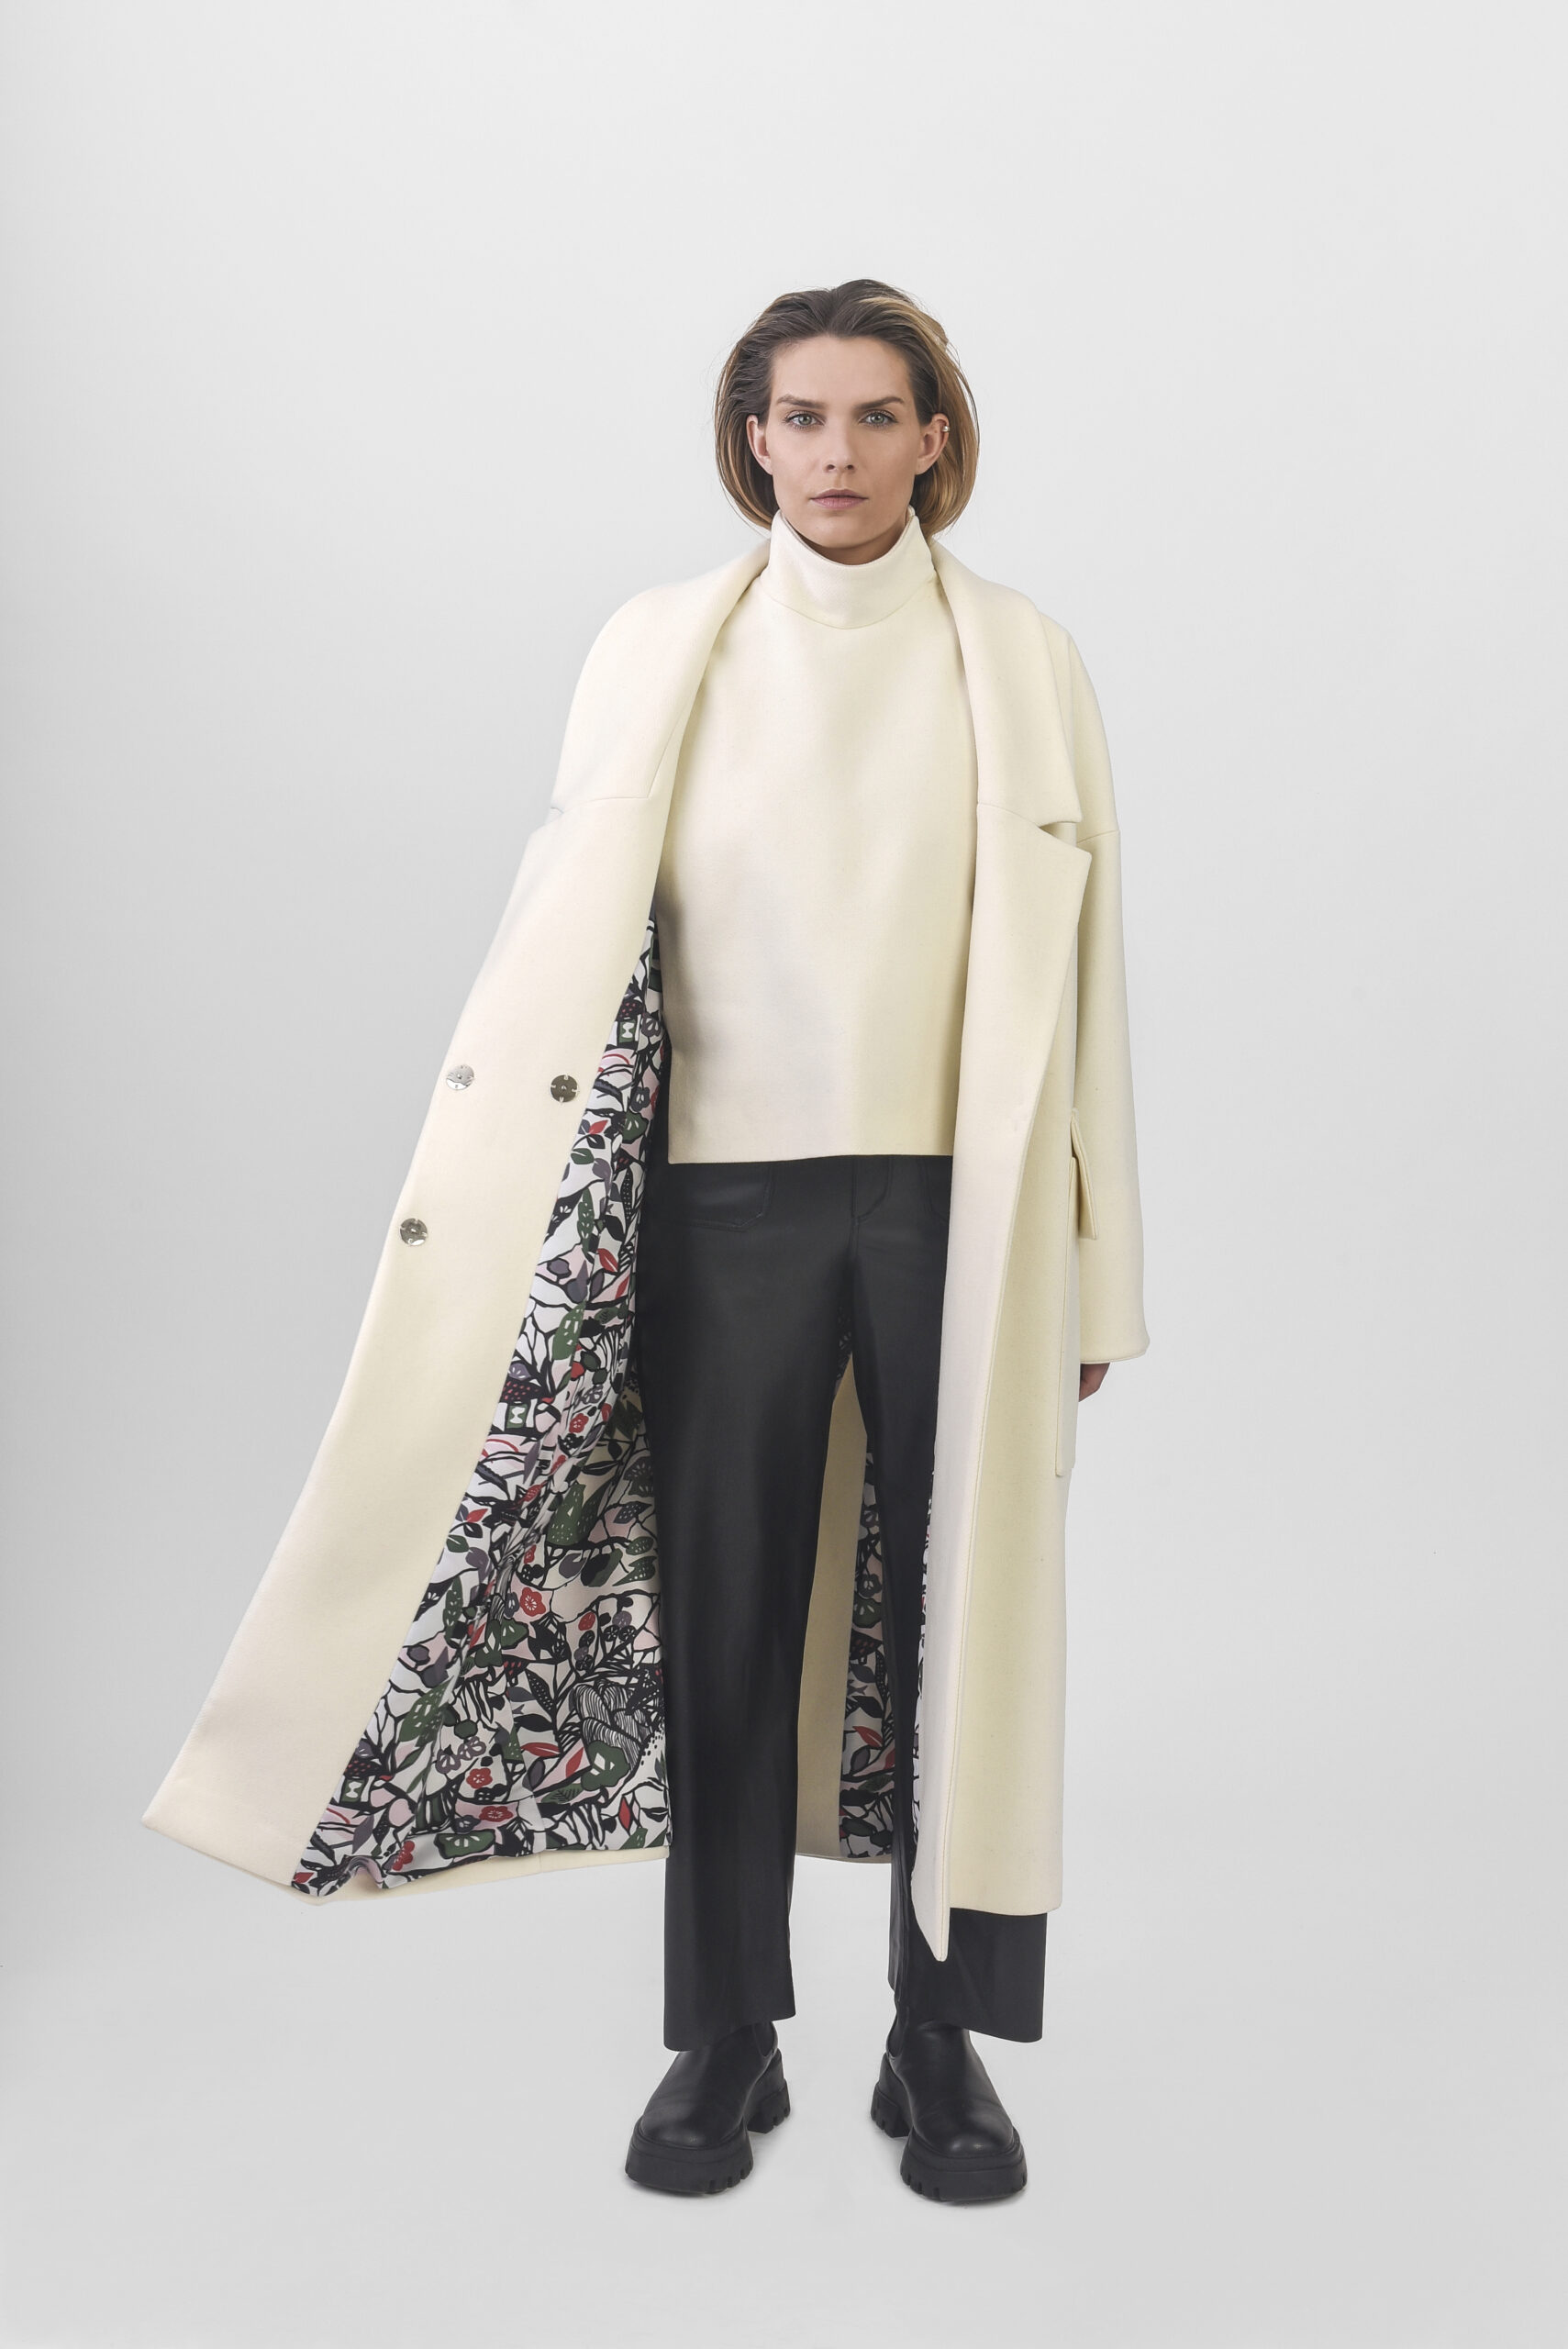 White coloured oversize coat and vest duo